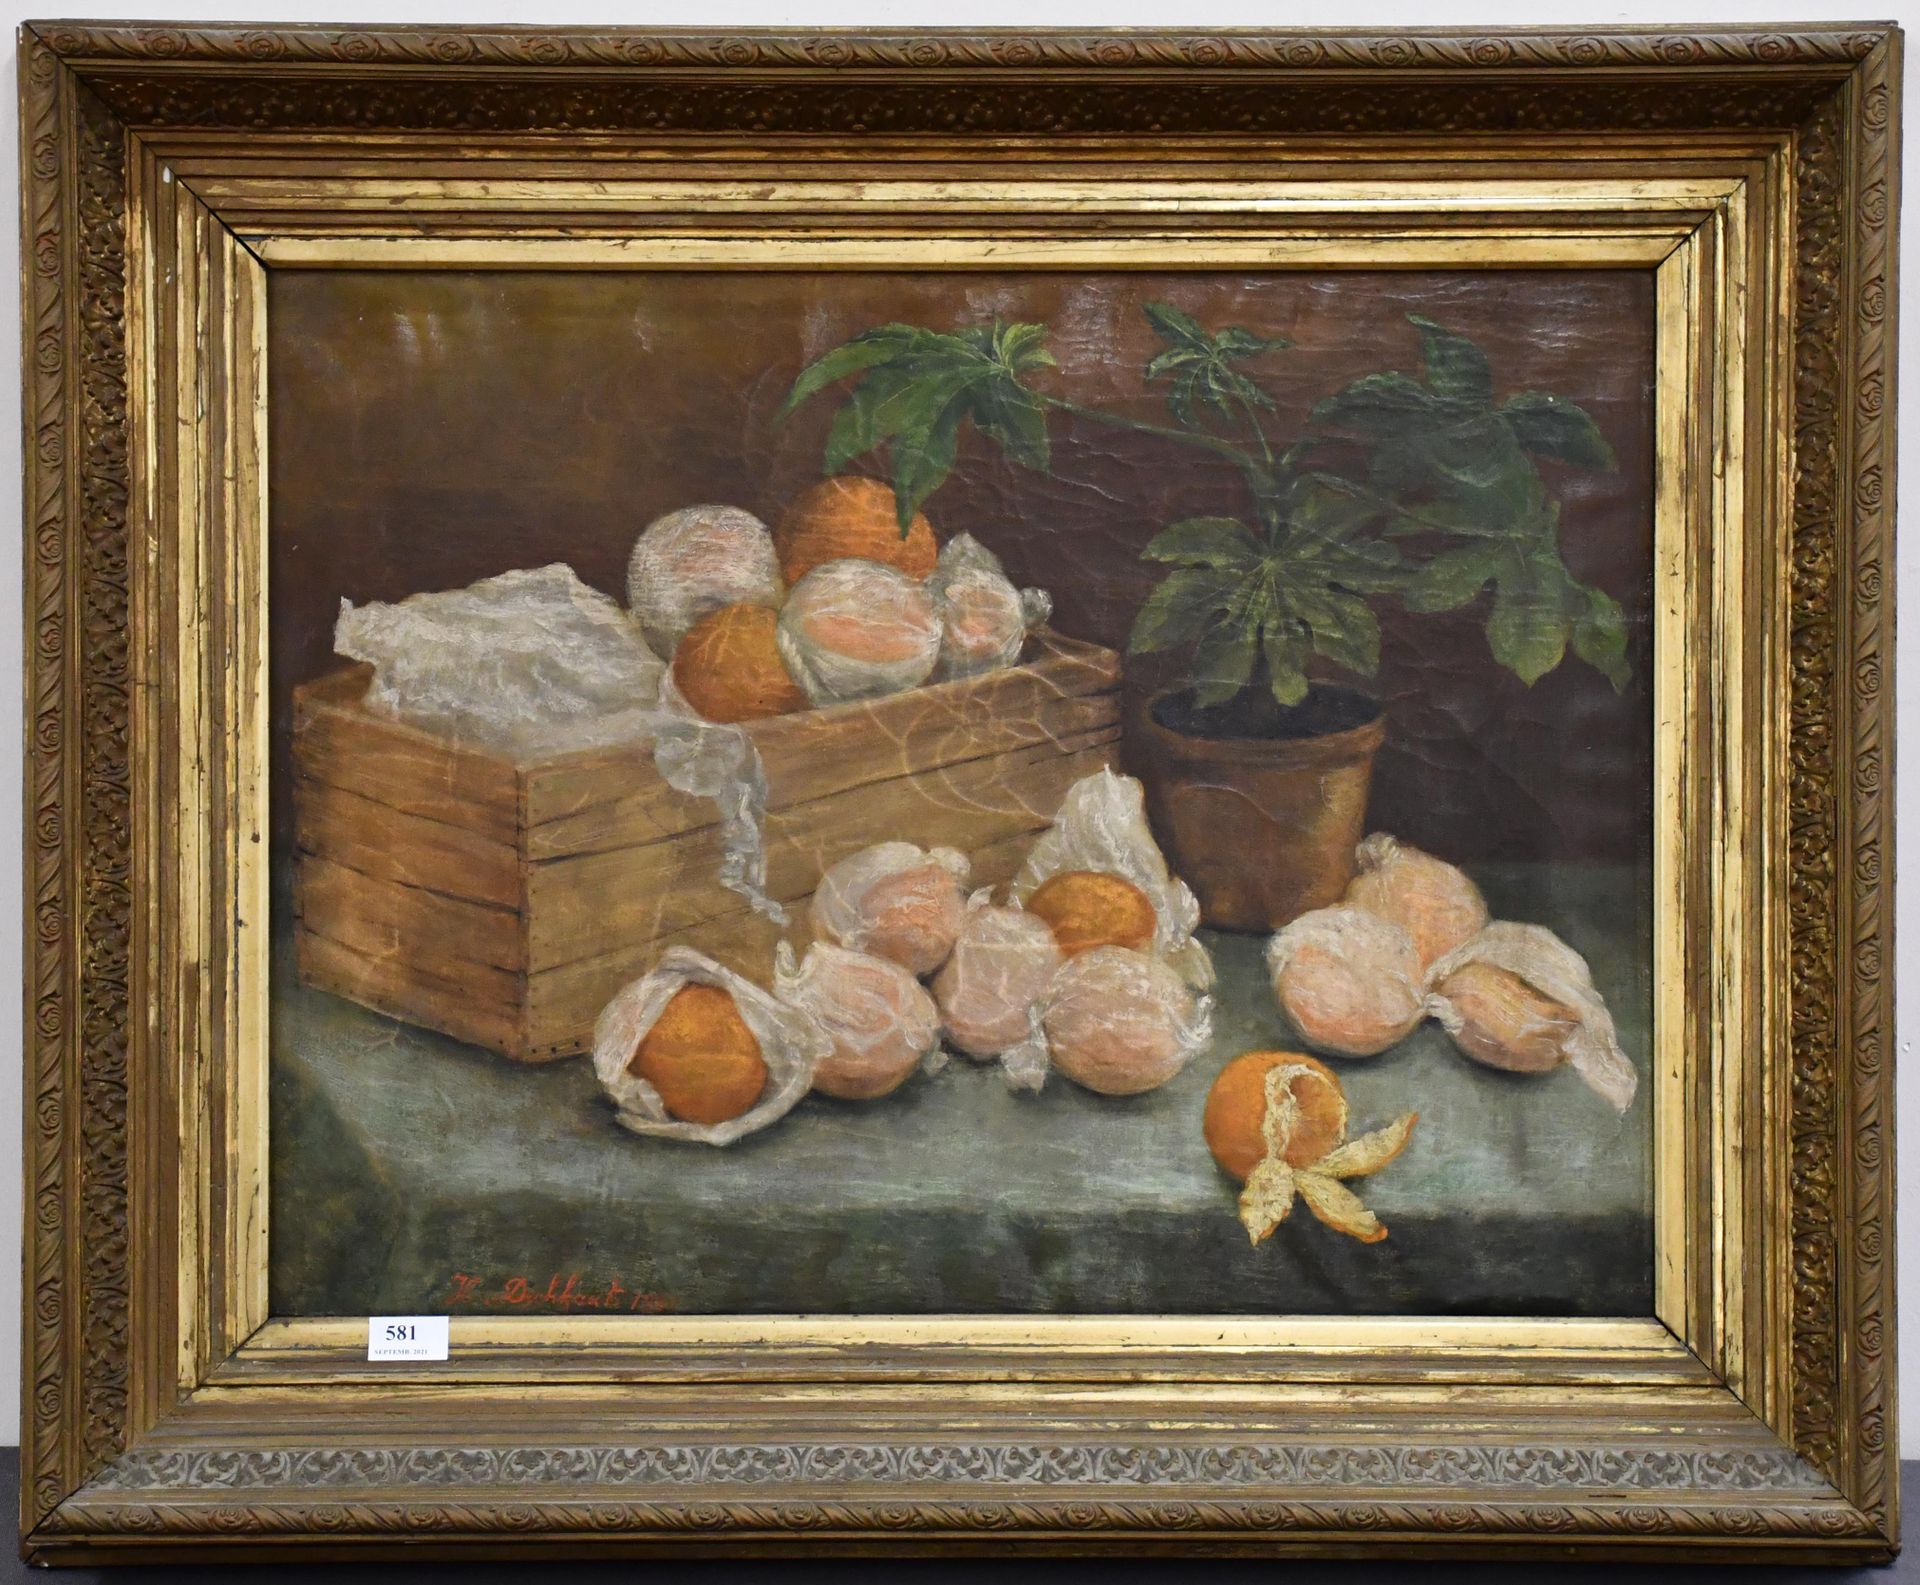 Null H. Dickhaut

Oil on canvas : "Still life with oranges". Signed and dated 18&hellip;